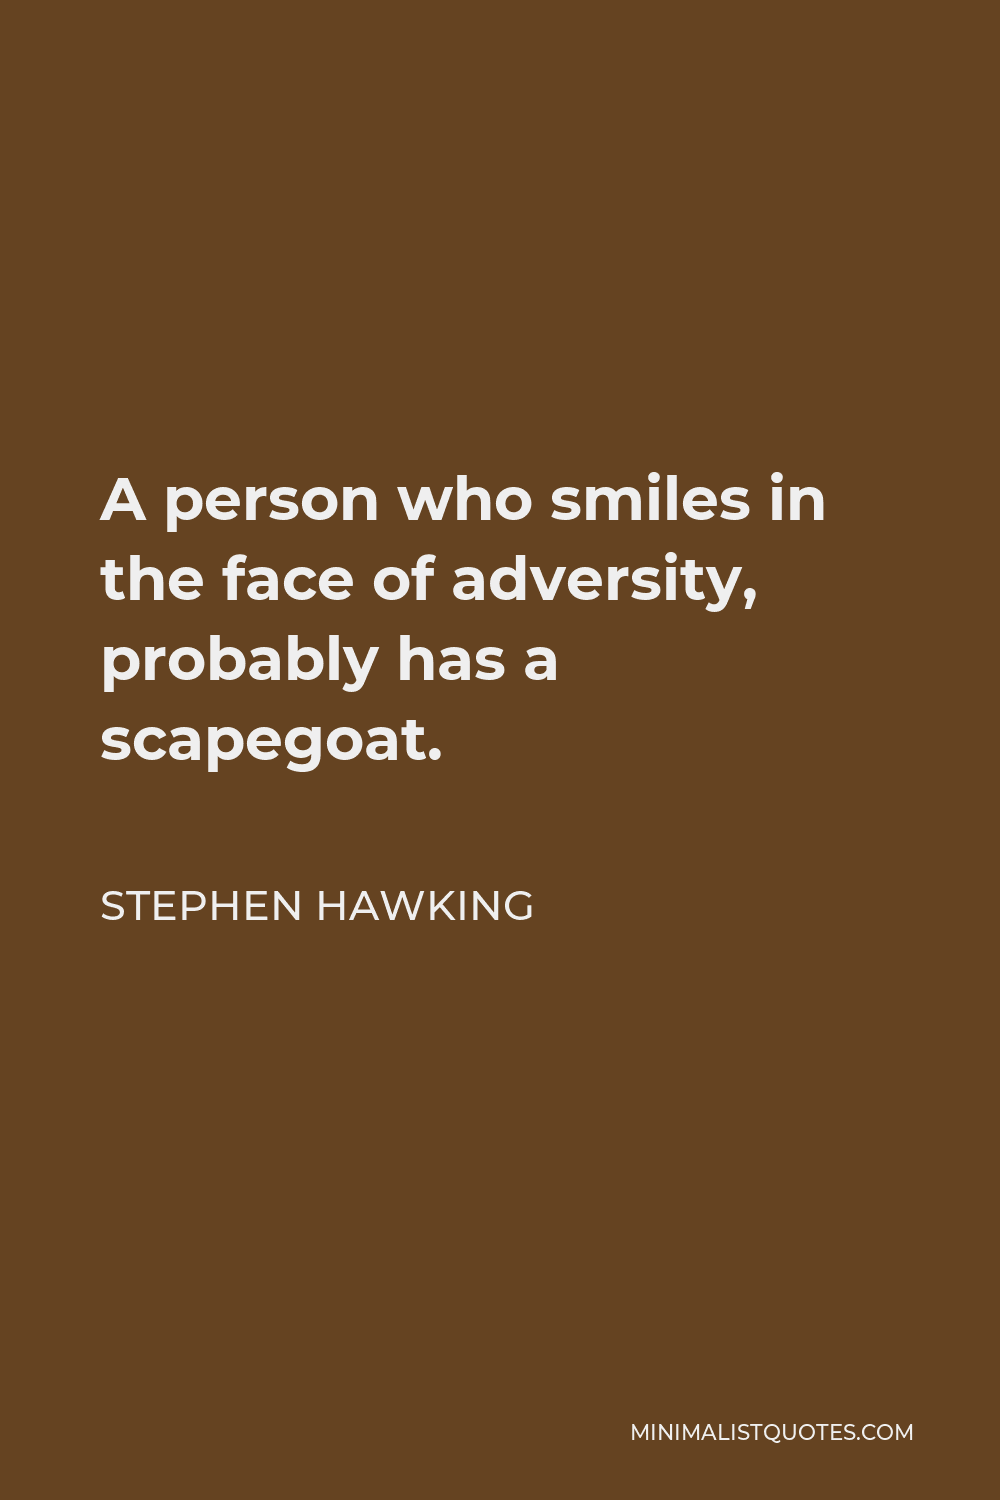 Stephen Hawking Quote - A person who smiles in the face of adversity, probably has a scapegoat.